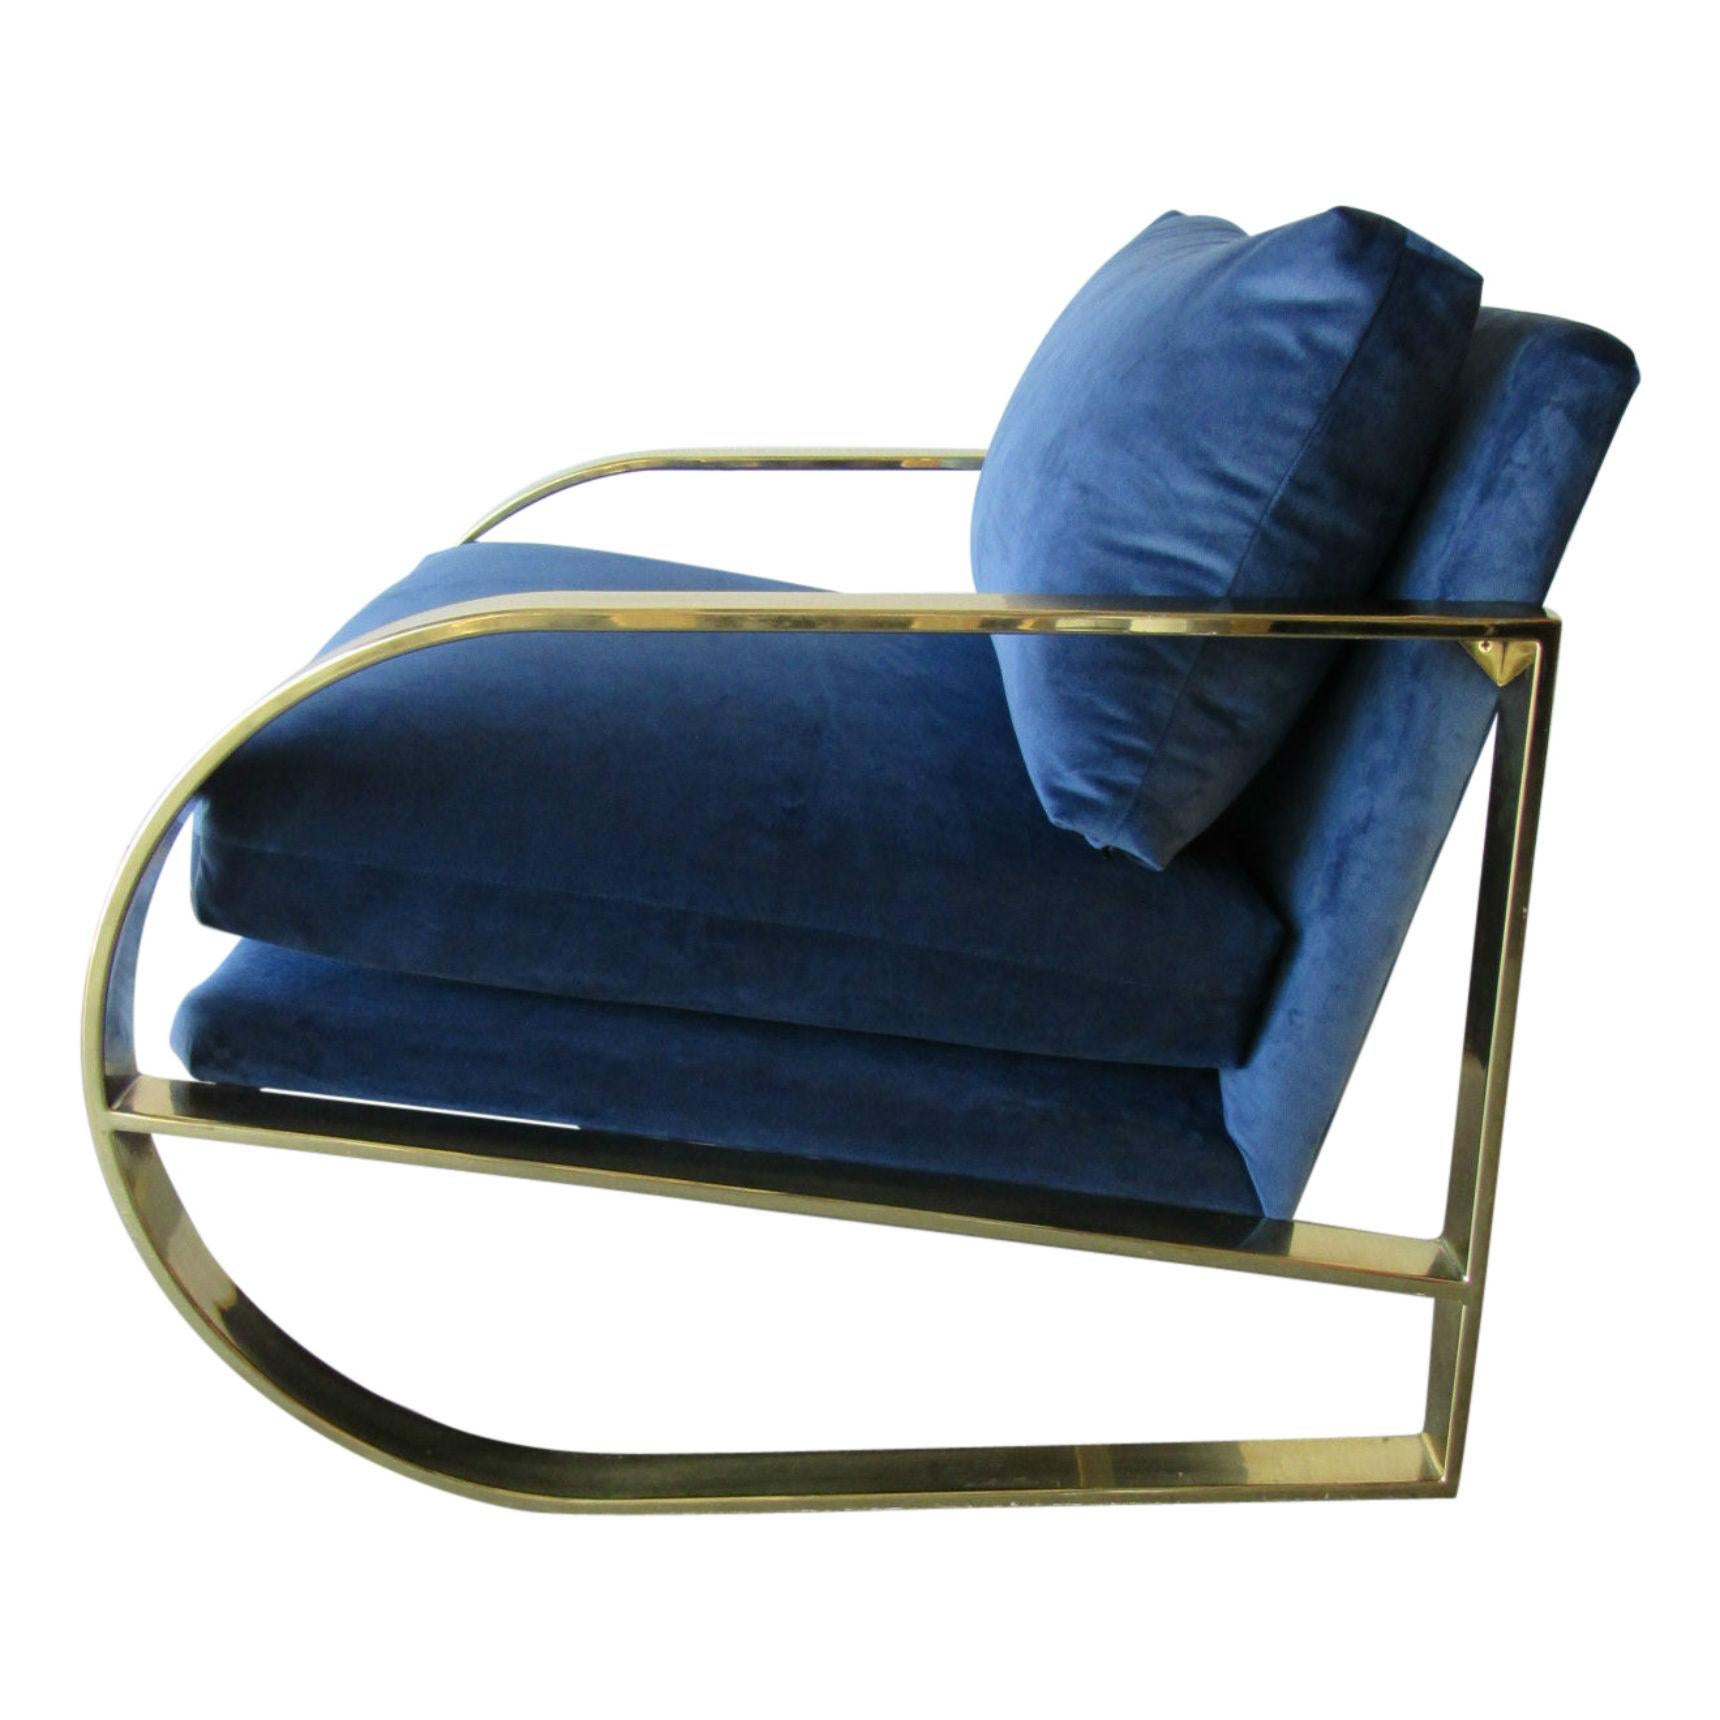 This chair strikes the perfect balance between geometric hard edges and soft upholstered luxury. Designed by renowned furniture designer John Mascheroni for Swaim in the 1960s this lounge chair has a lacquered brass frame and new blue velvet